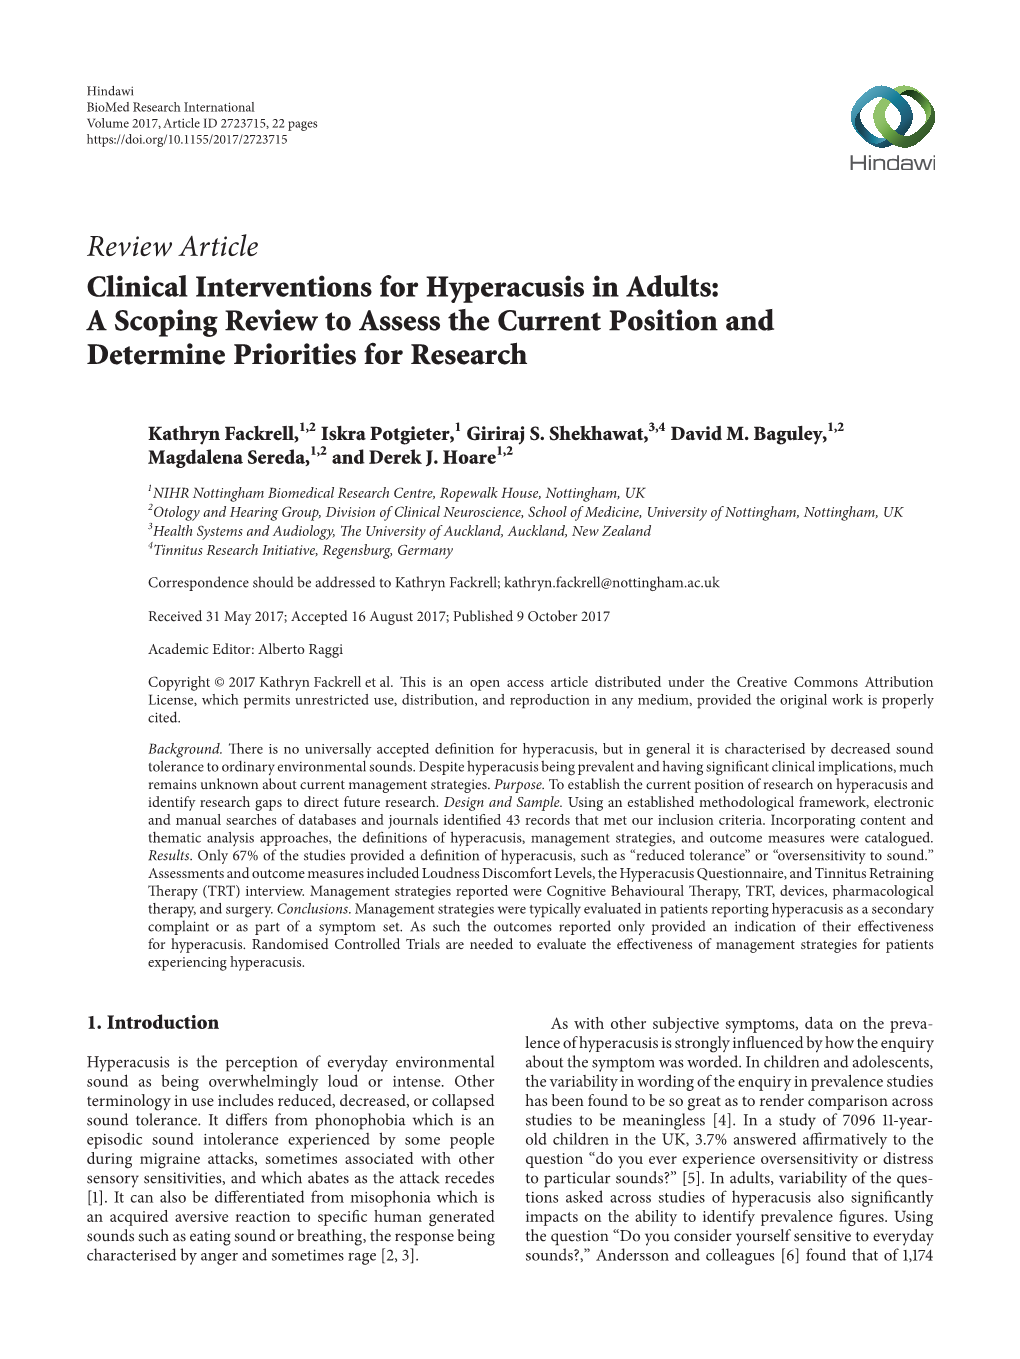 Review Article Clinical Interventions for Hyperacusis in Adults: a Scoping Review to Assess the Current Position and Determine Priorities for Research